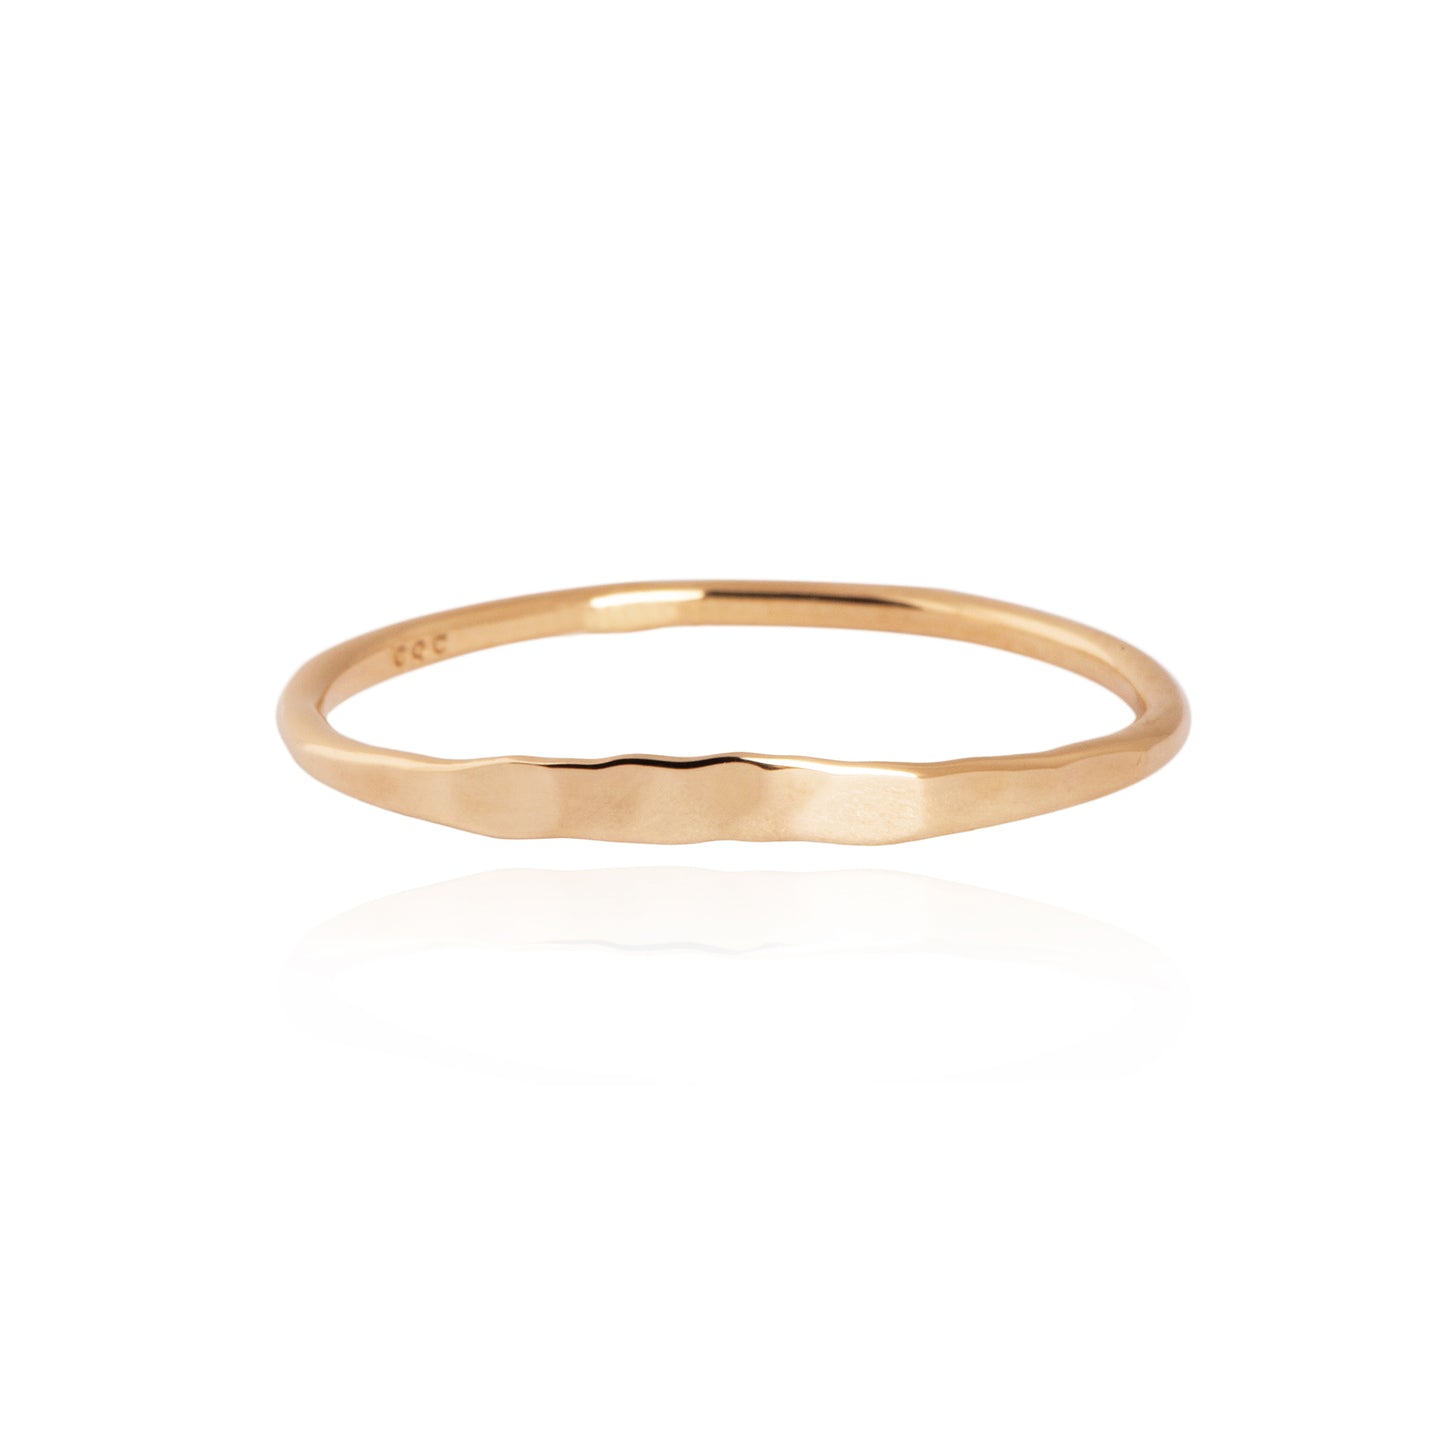 Onepoint Hammered Ring 14k gold